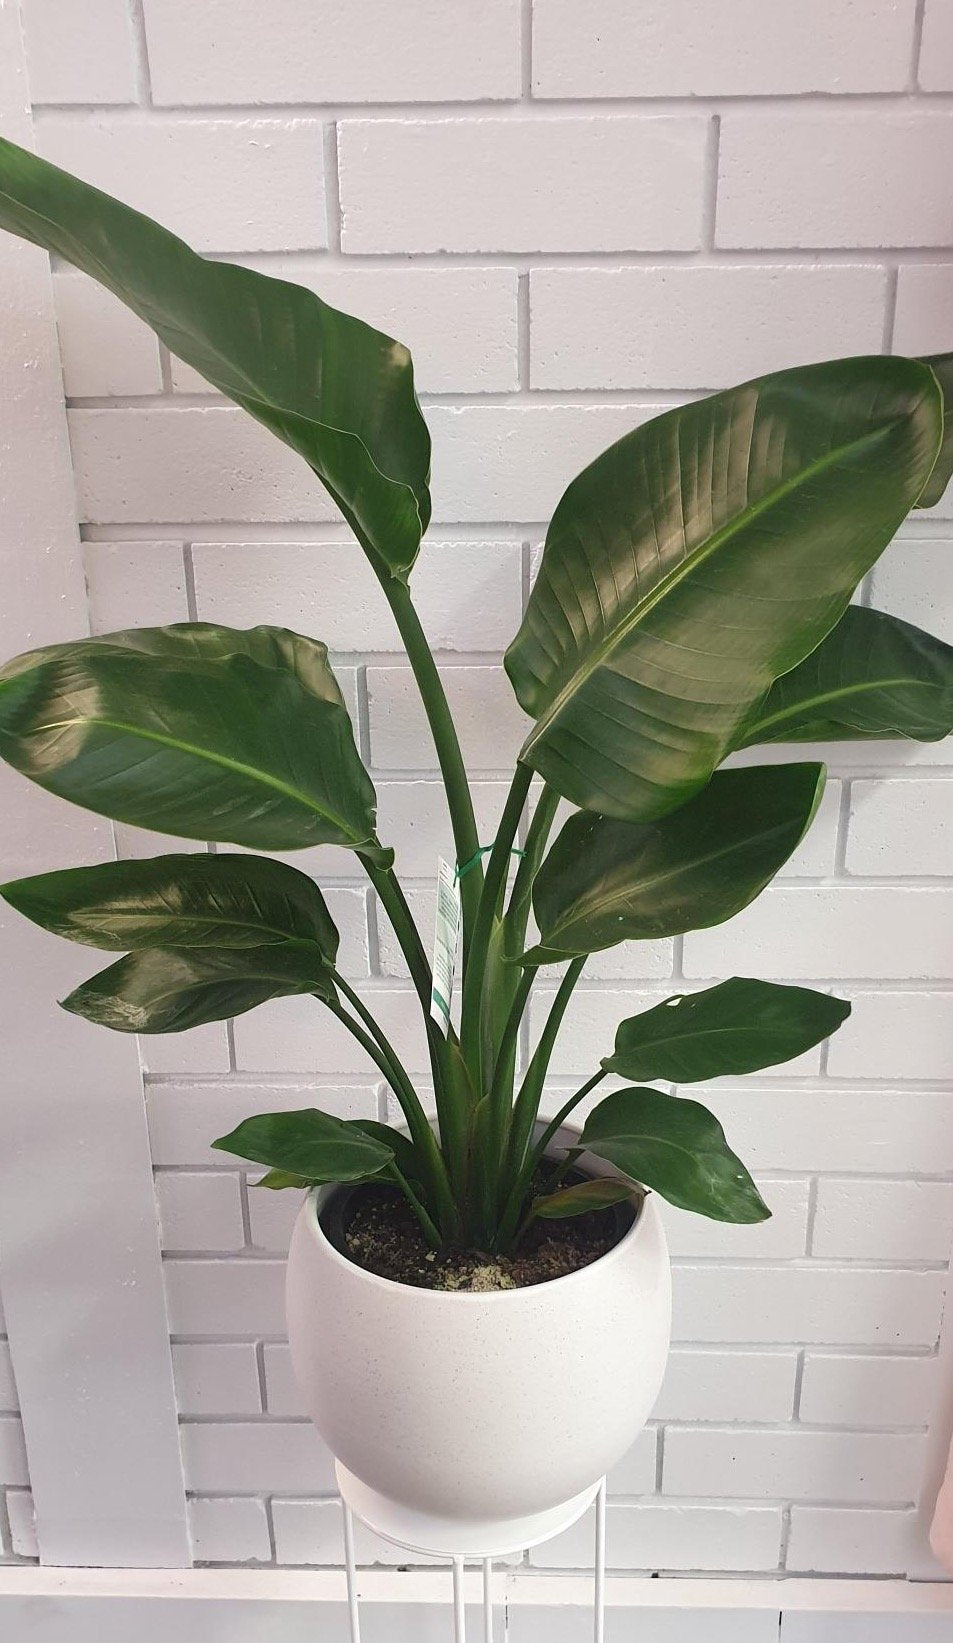 Striking, tropical like indoor plant, with large glossy, dark green leaves. Available for delivery to Yamba, Maclean, Grafton & Iluka from Willow Botanica Florist.